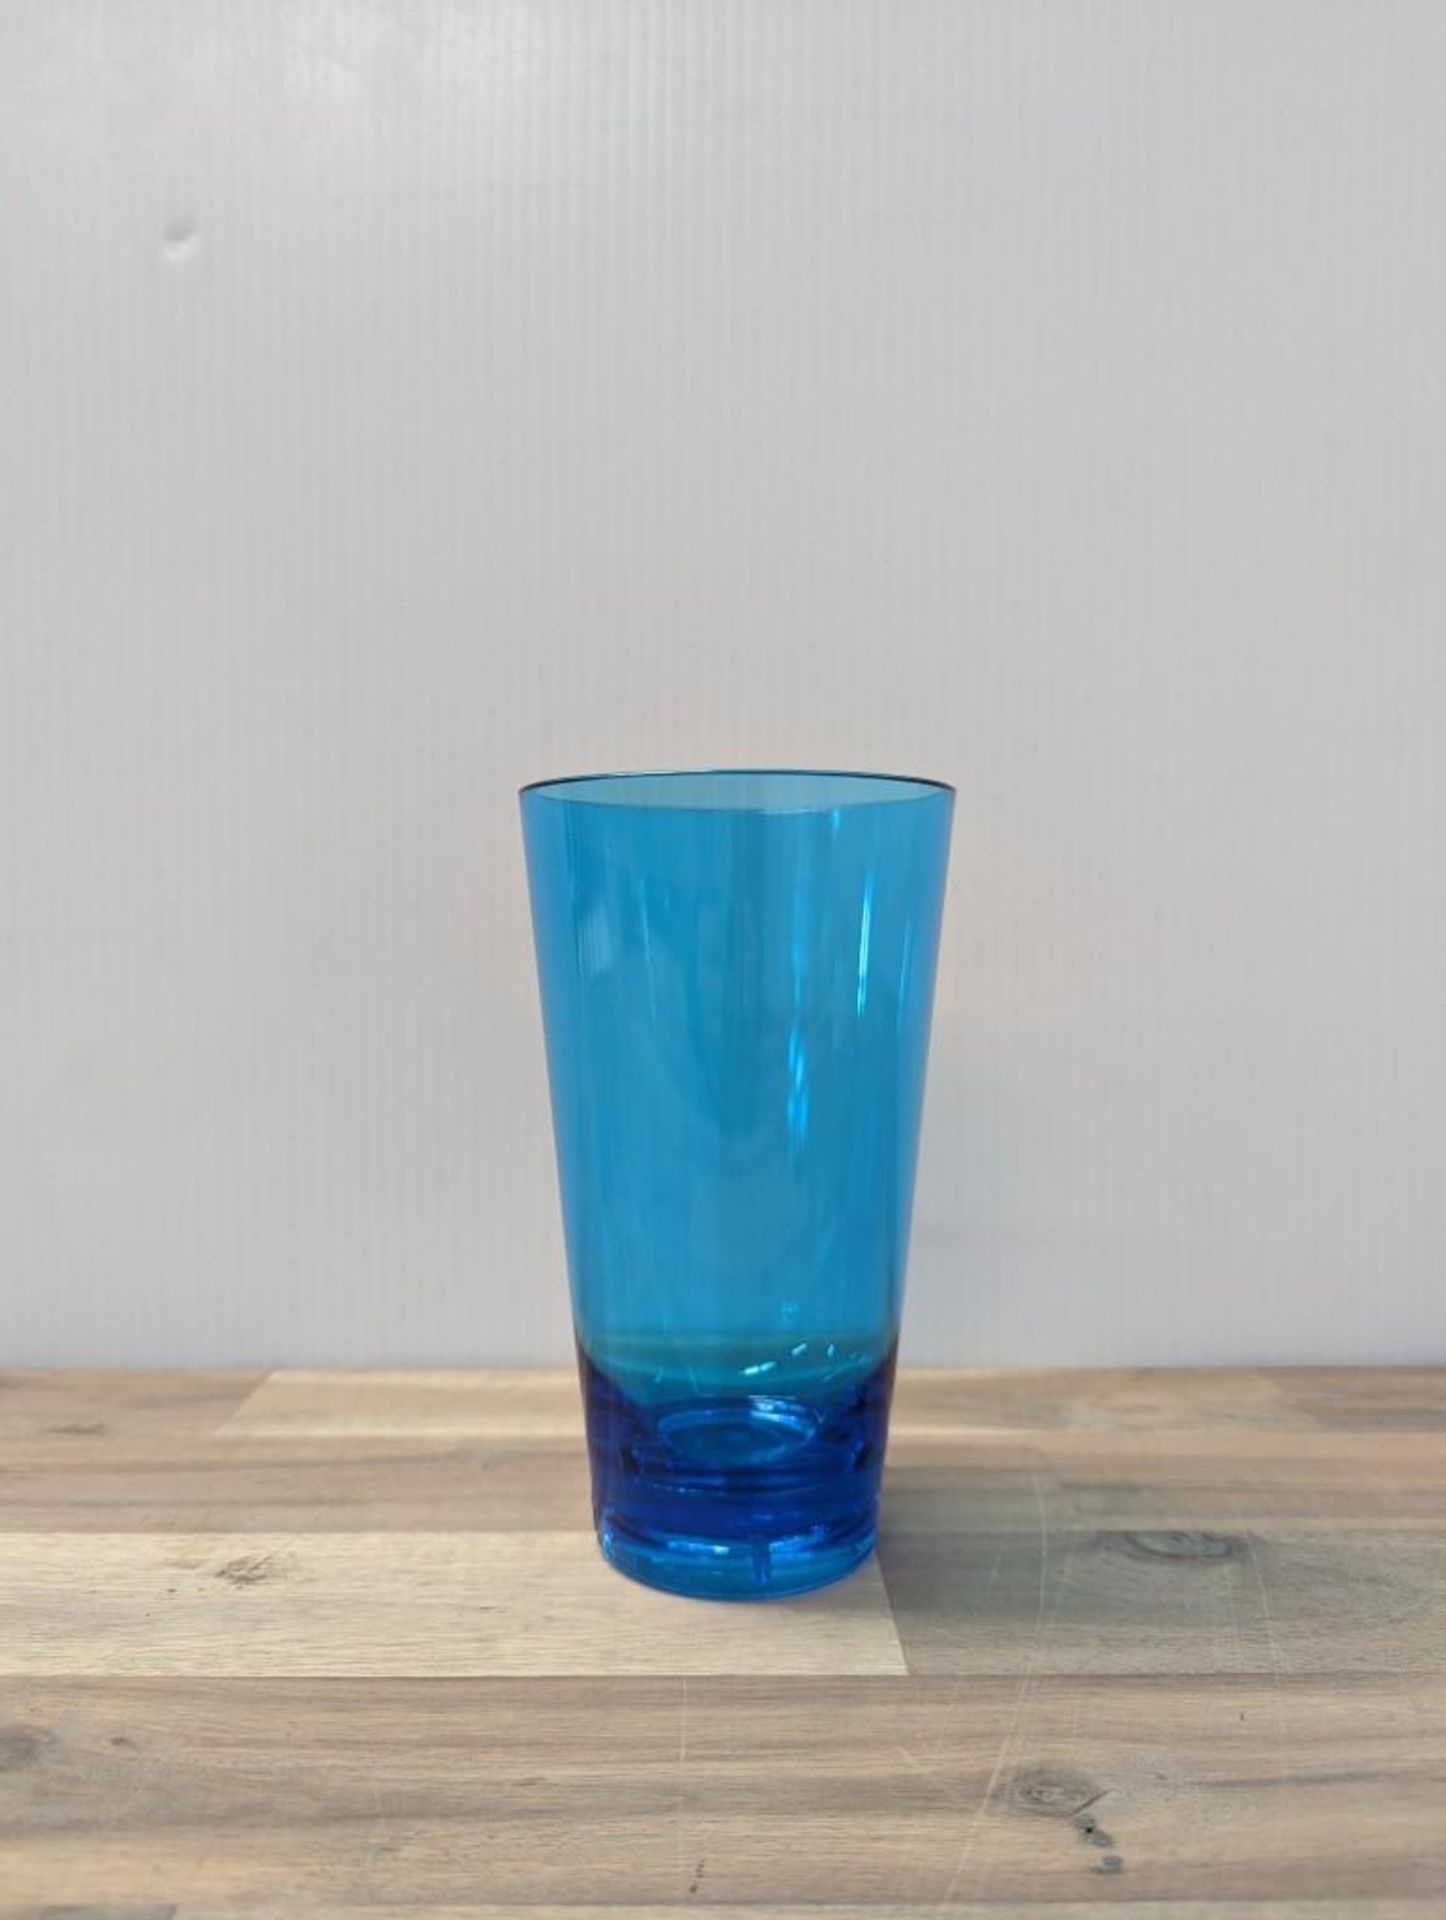 19.75OZ OUTDOOR PERFECT BLUE COOLER GLASSES, ARCOROC FM403 - LOT OF 36 - NEW - Image 3 of 10